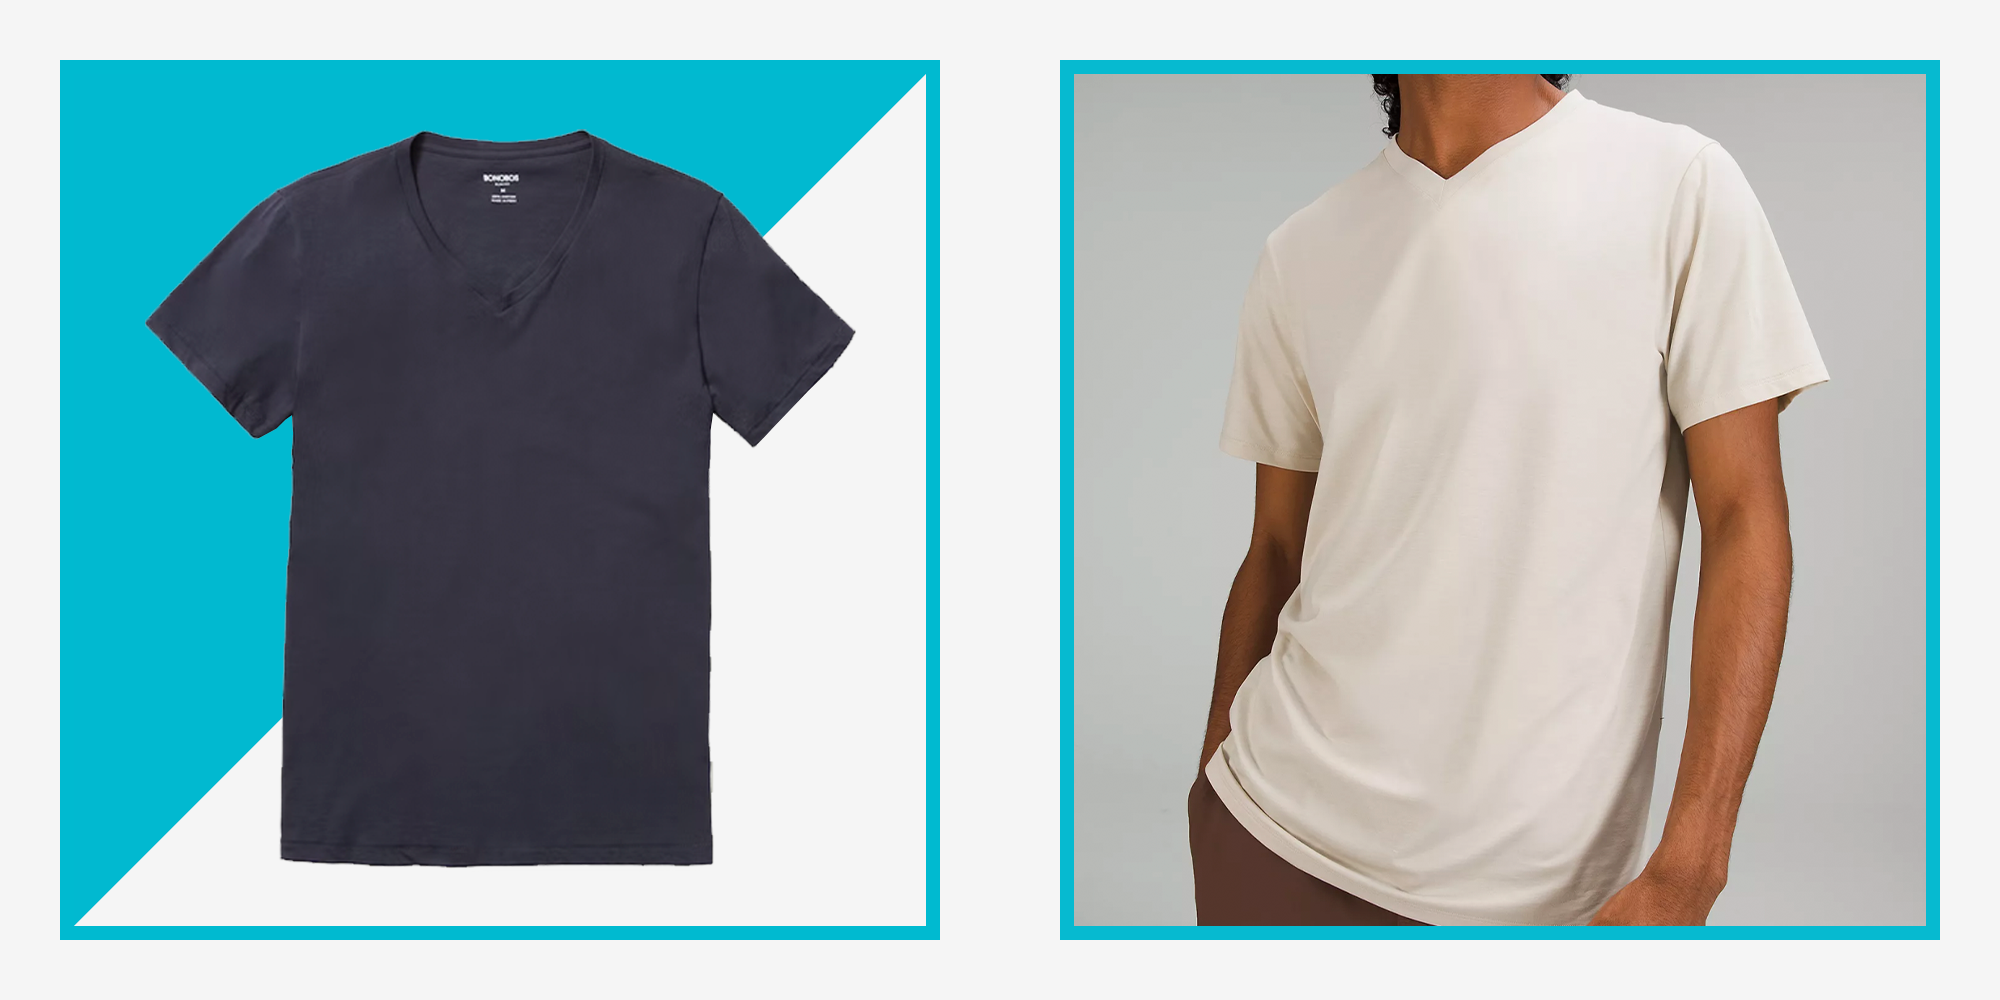 Different types of fabrics for t shirts like polo, round neck, v neck